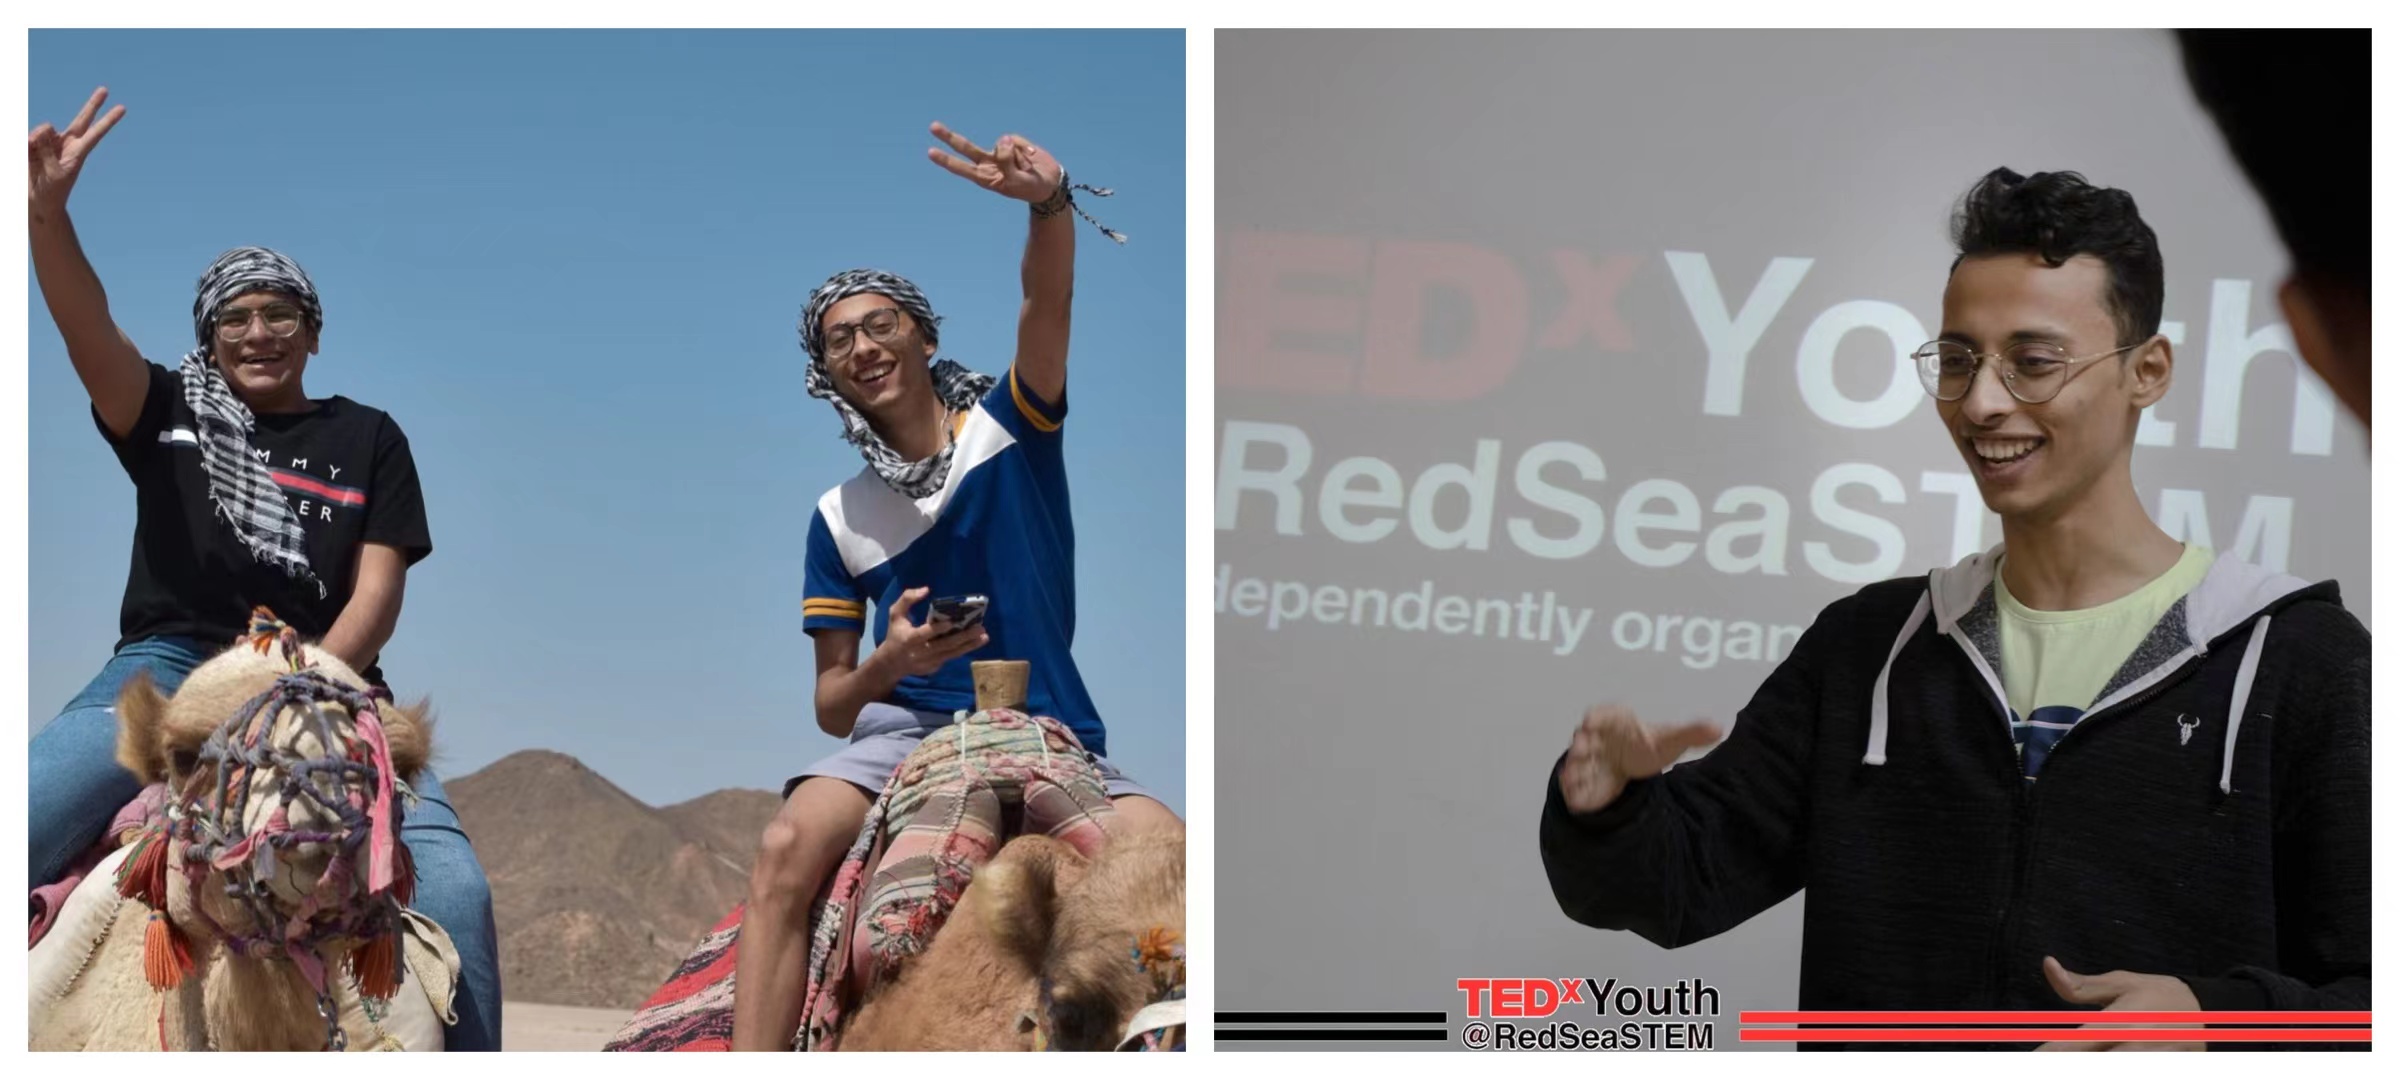 Androw with a friend on a camel (left) and Androw at a TedX conference